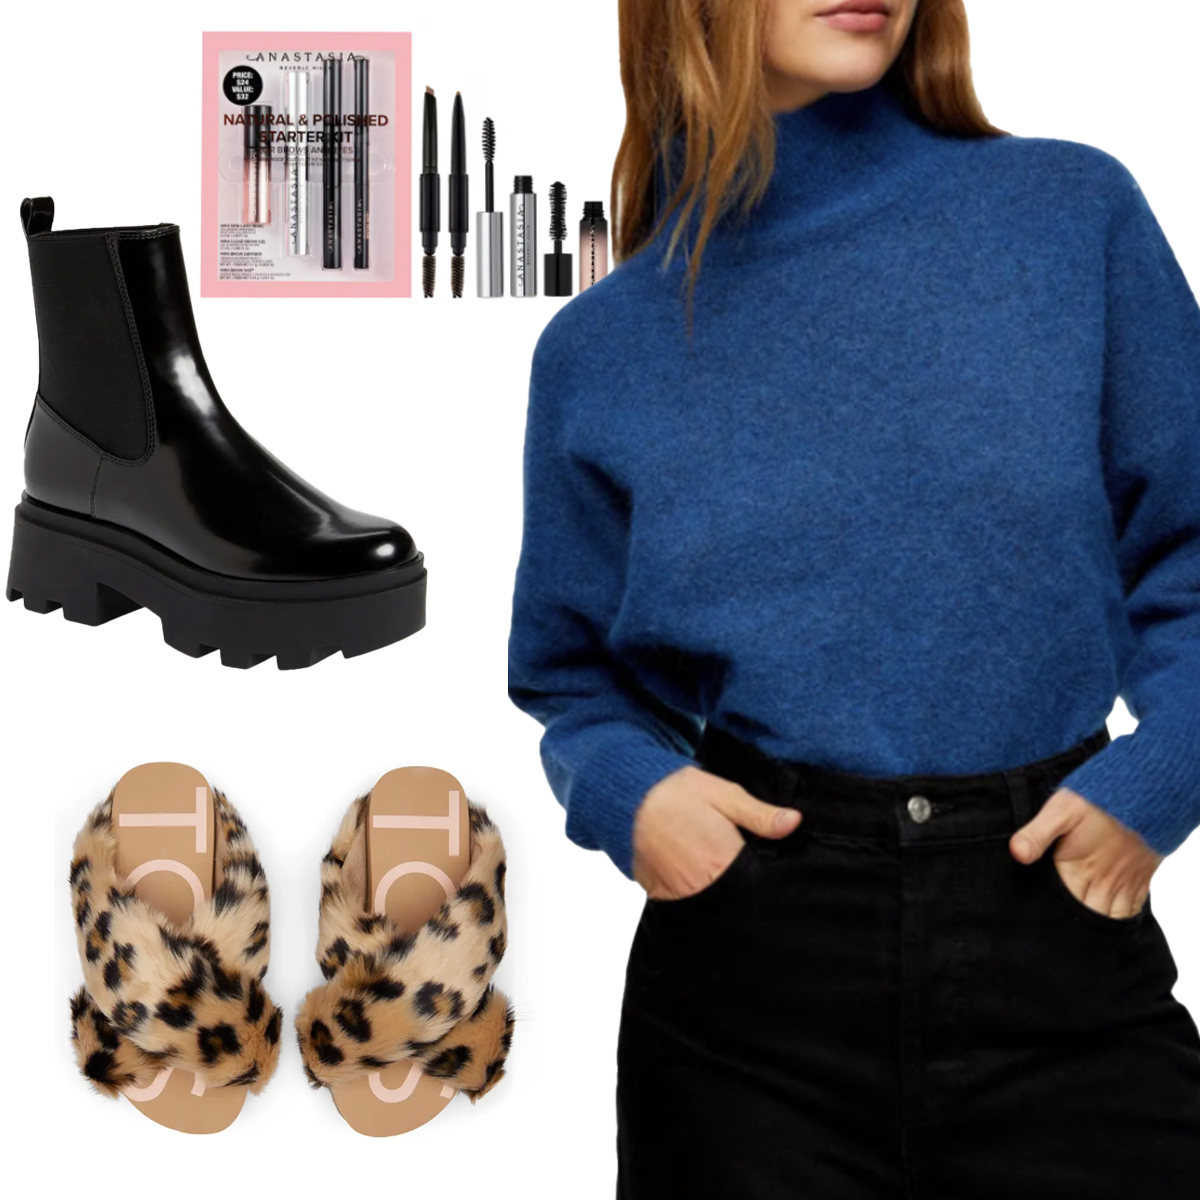 Nordstrom Rack has major deals on Ugg boots and slippers up to 60% off 